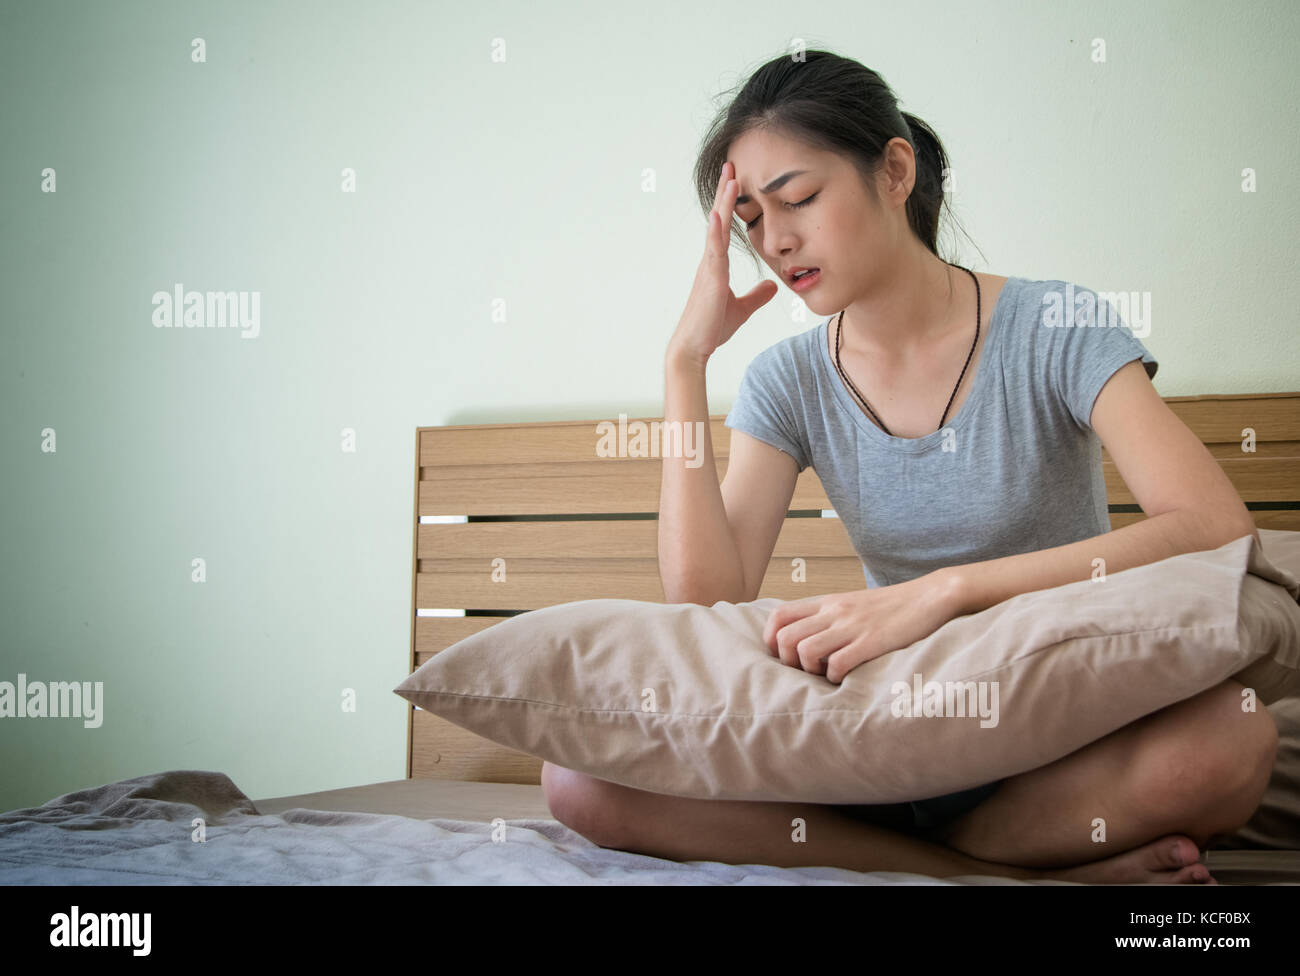 Young pregnant woman feeling unwell , suffering from morning sickness. Stock Photo